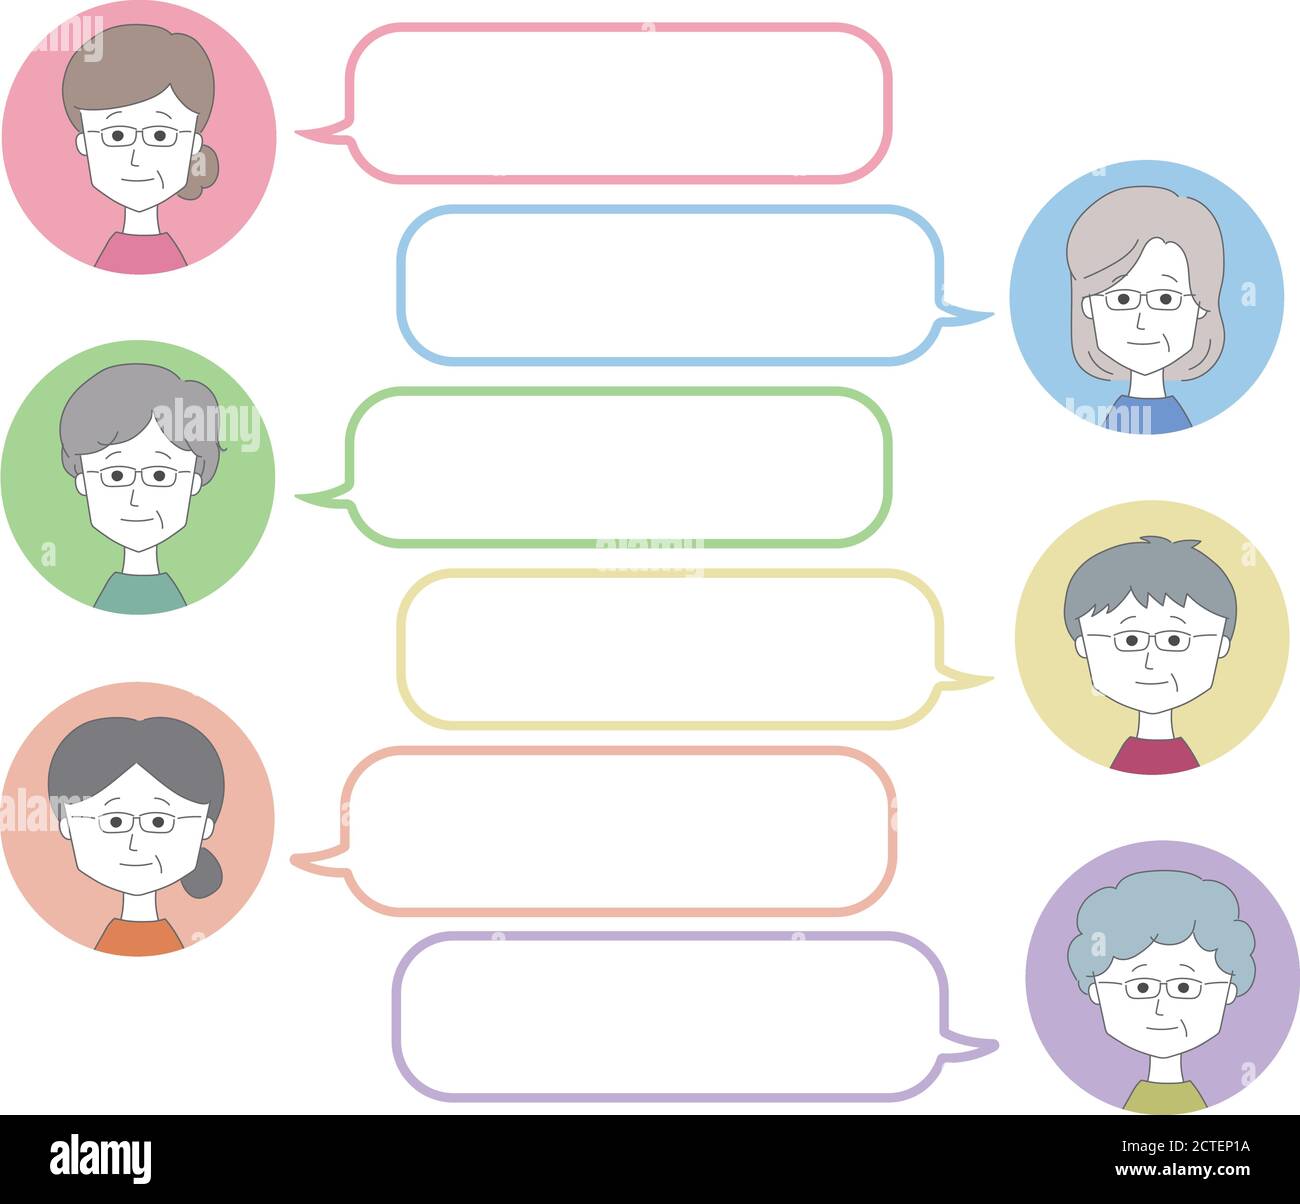 Middle aged women wearing glasses talking with their friends. Set of speech bubbles and profile pictures. Stock Vector